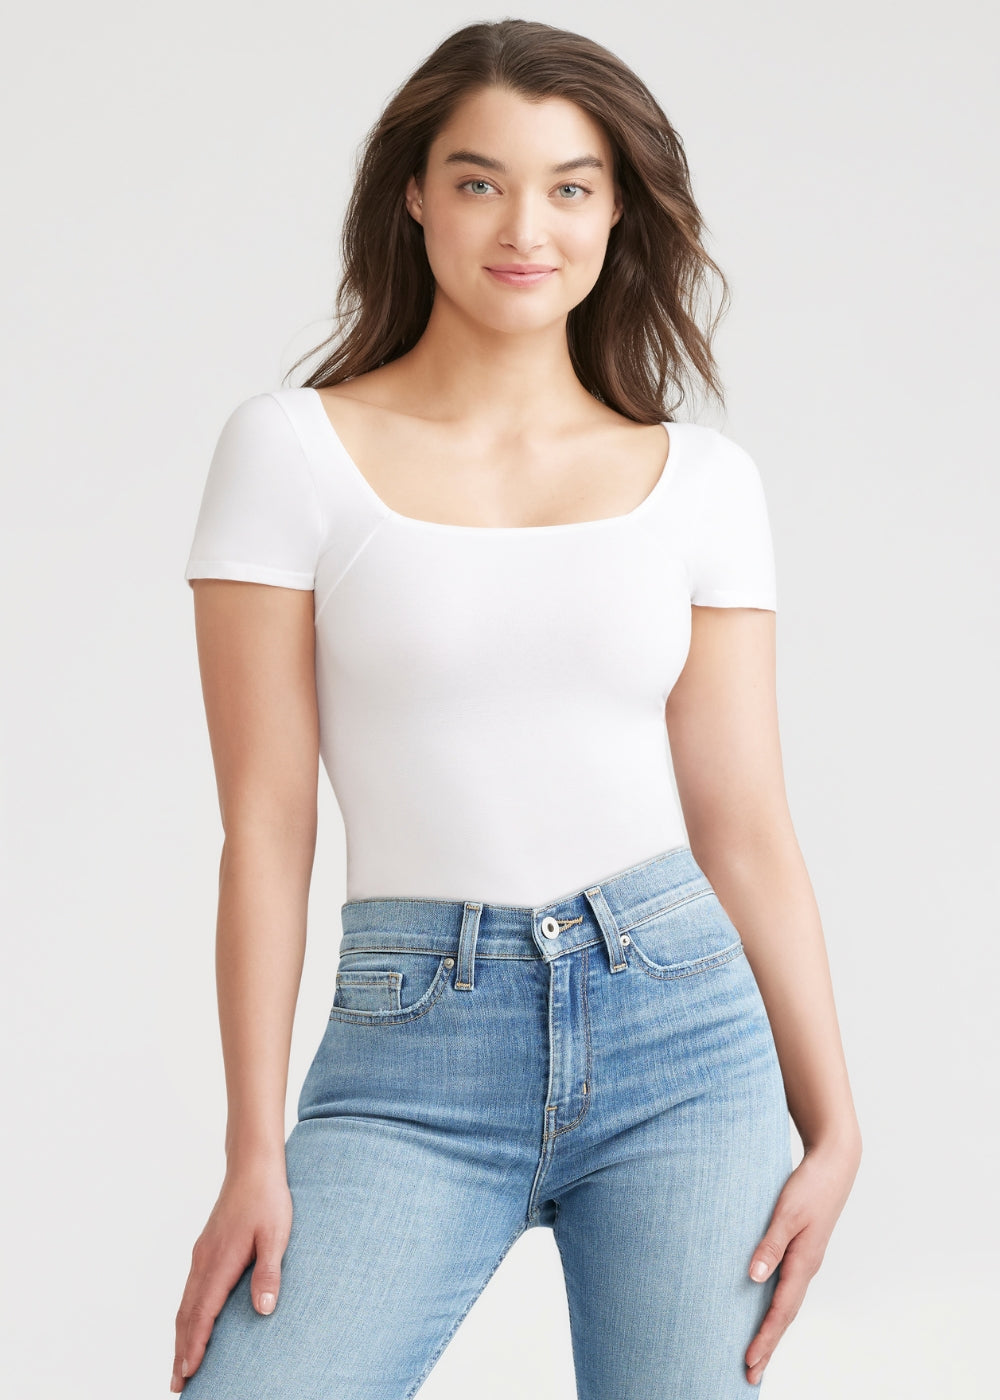 anette shaping thong bodysuit - cotton seamless in White and jeans worn by a woman standing facing forward with hands on sides of thighs Yummie